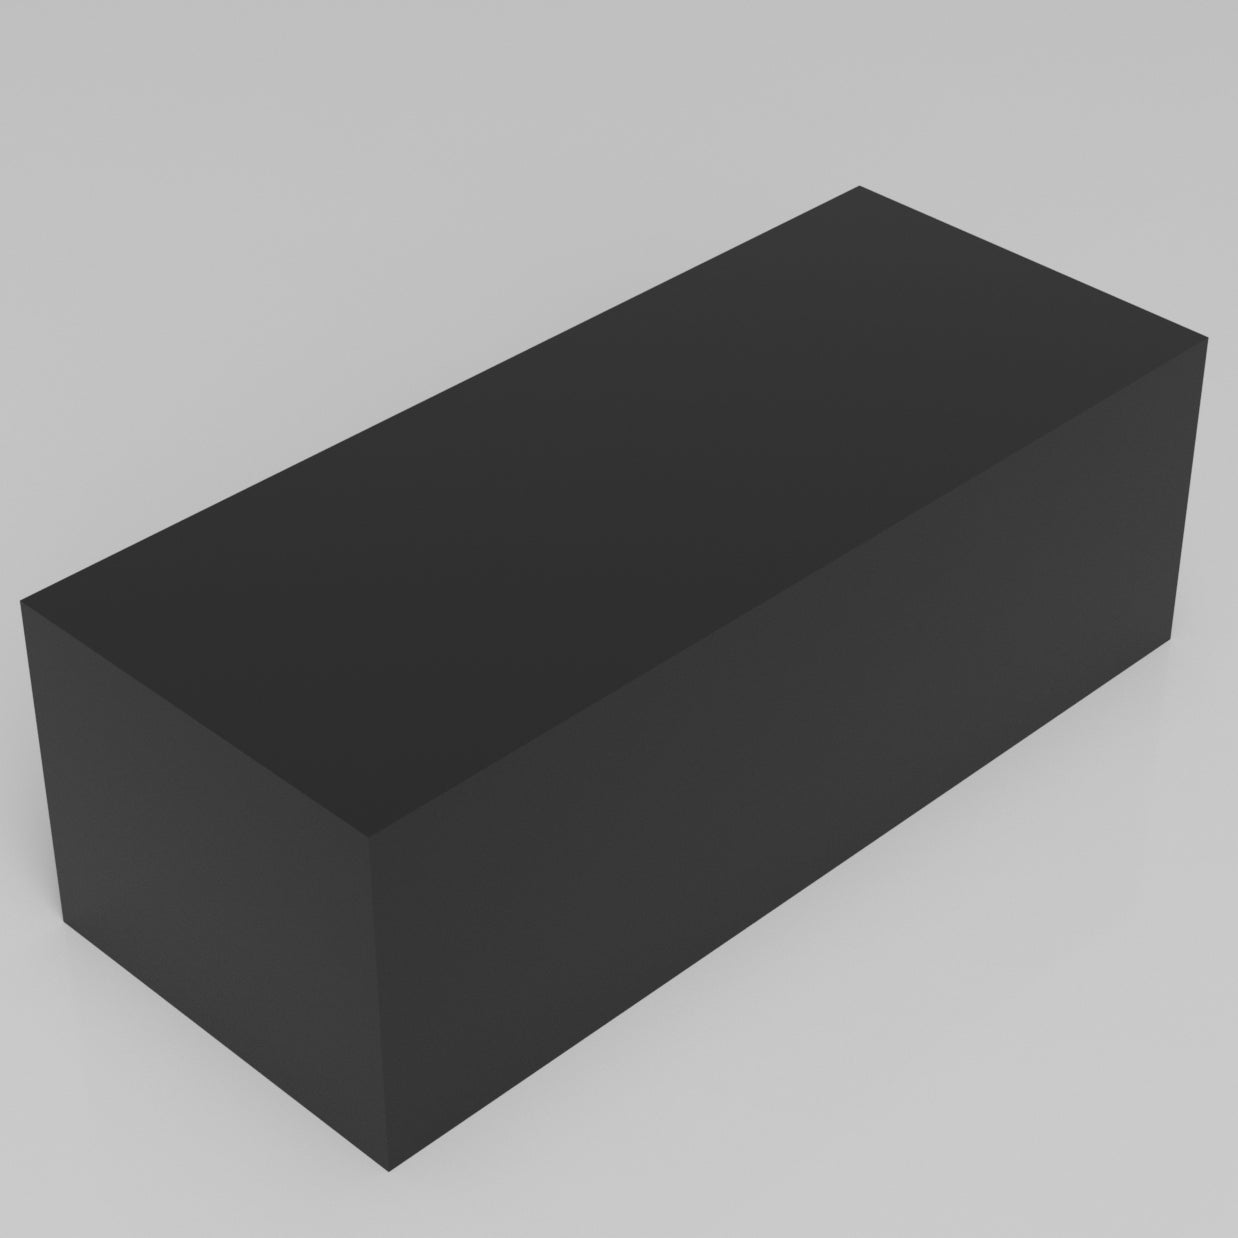 Machinable Wax Rectangular Block Front View 4 Inch by 5 Inch by 12 Inch